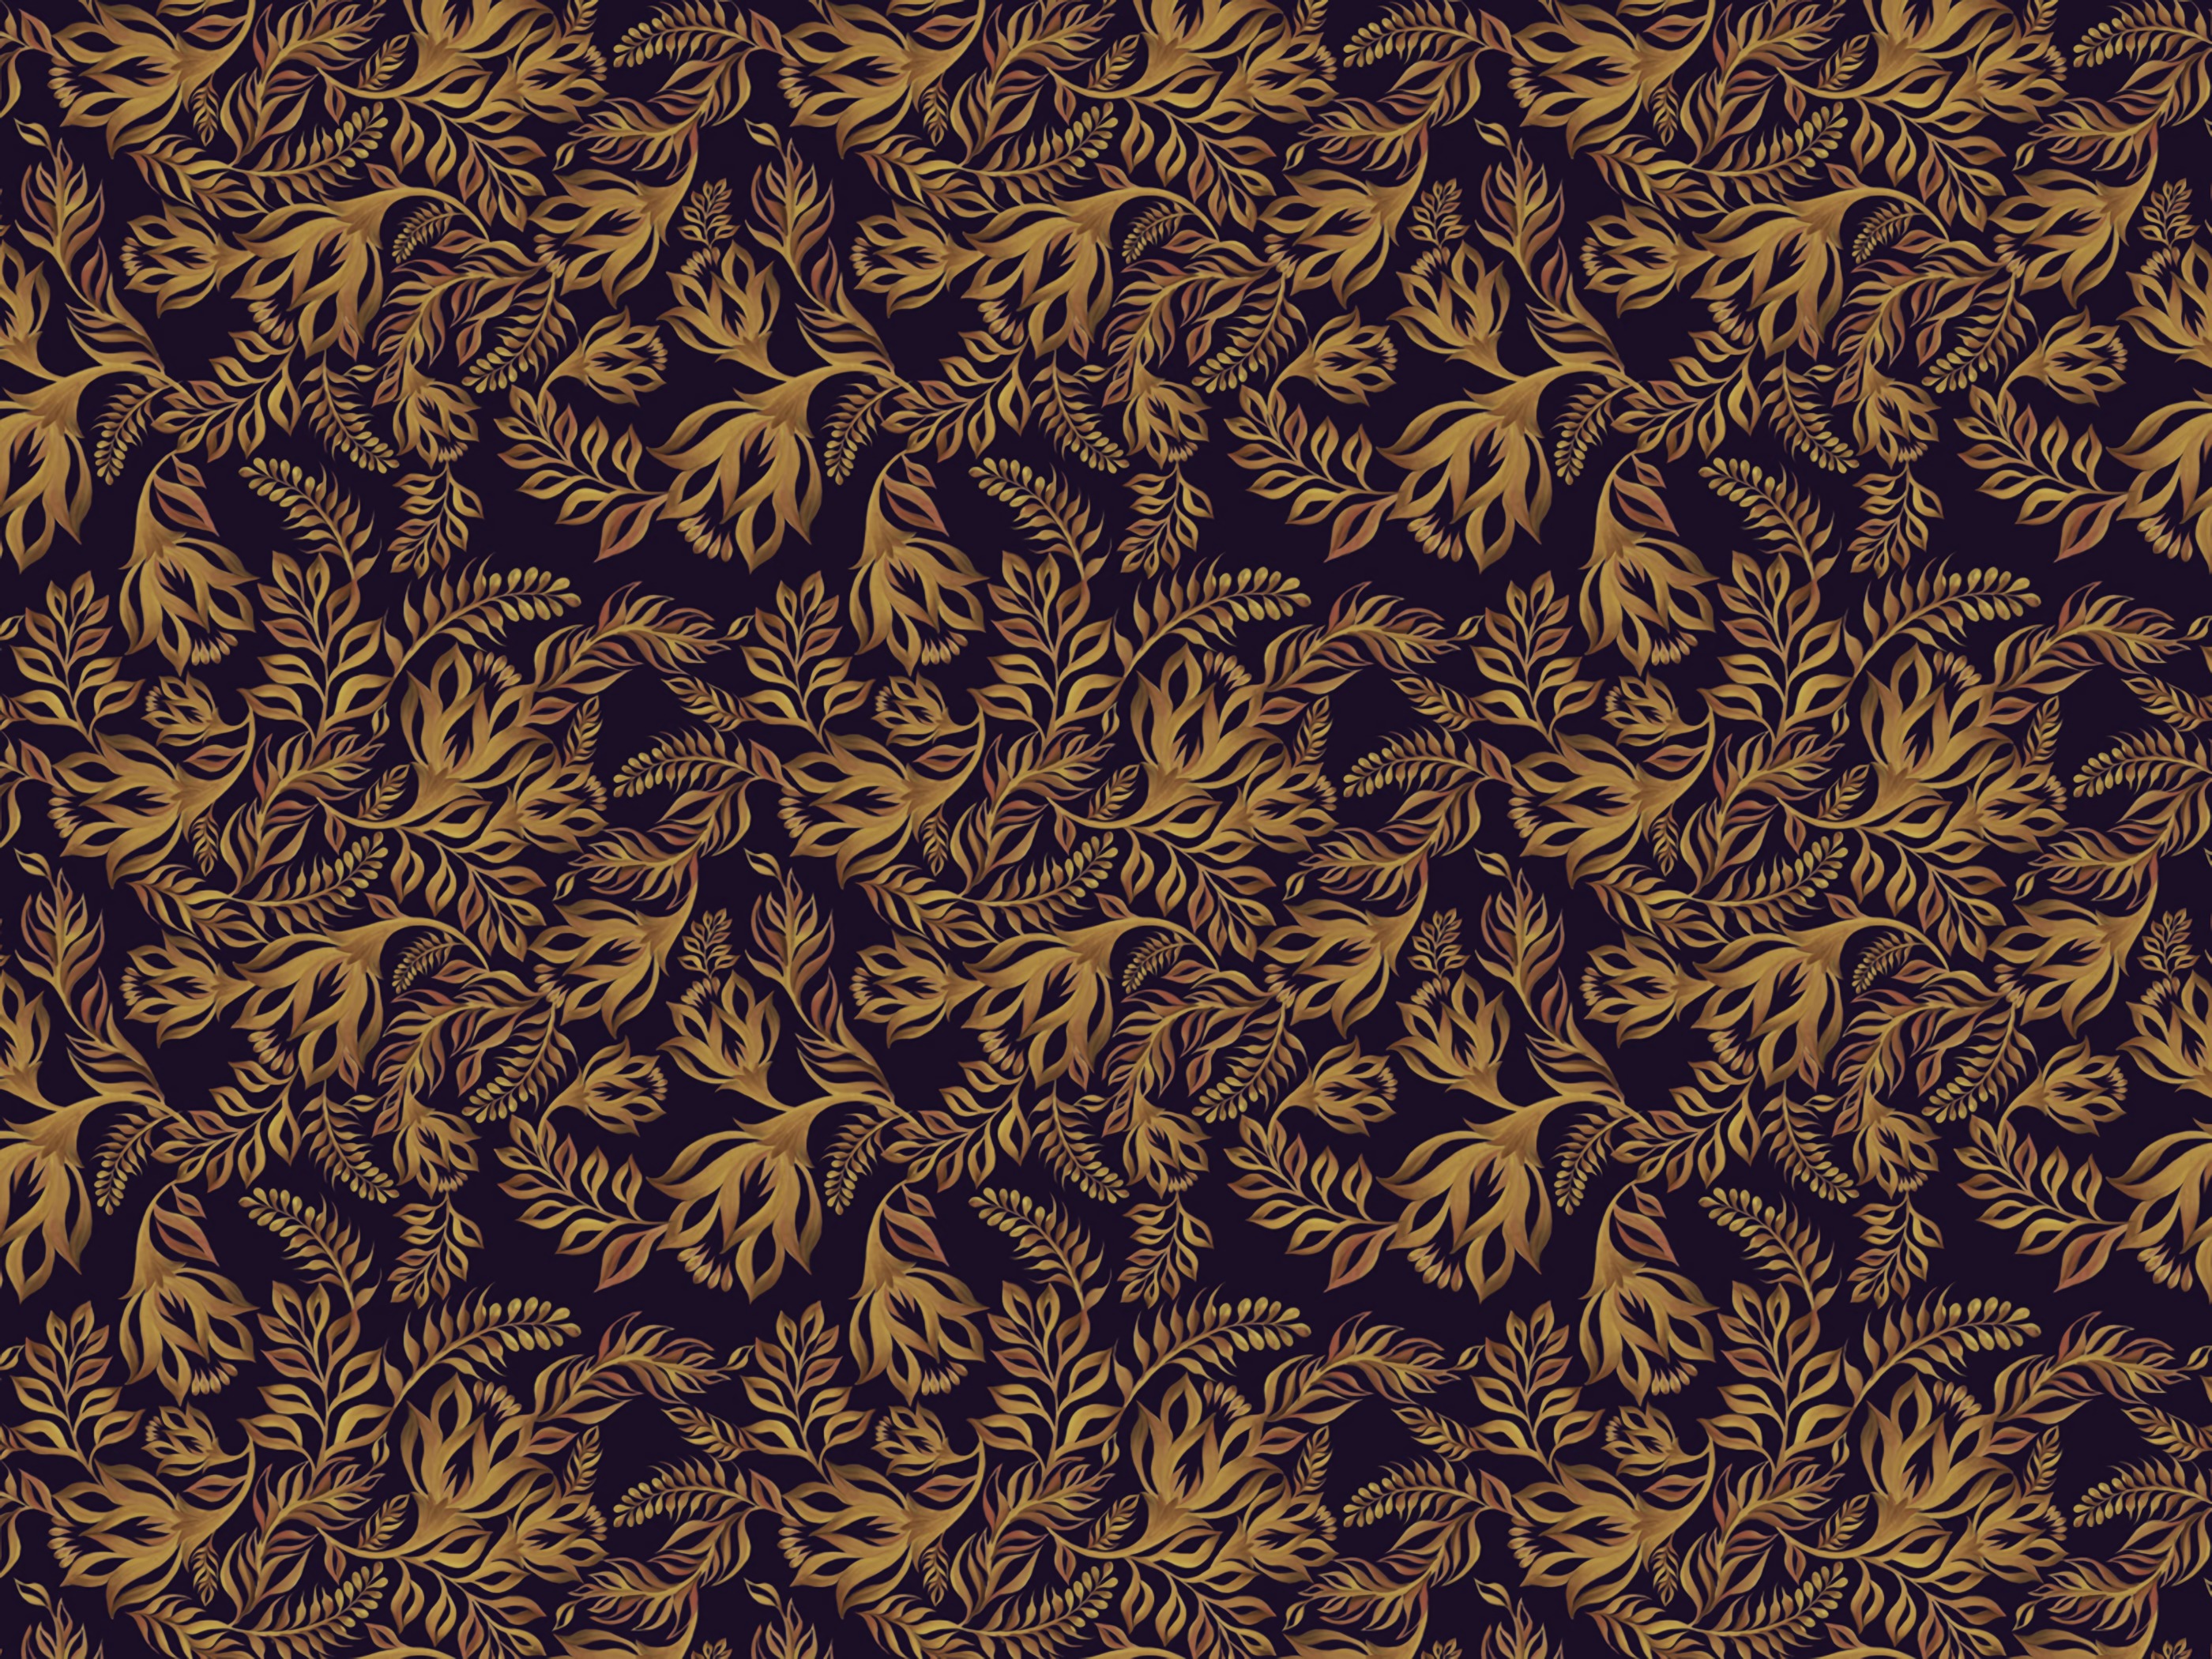 textures, texture, ornament, plants, pattern, brown Aesthetic wallpaper